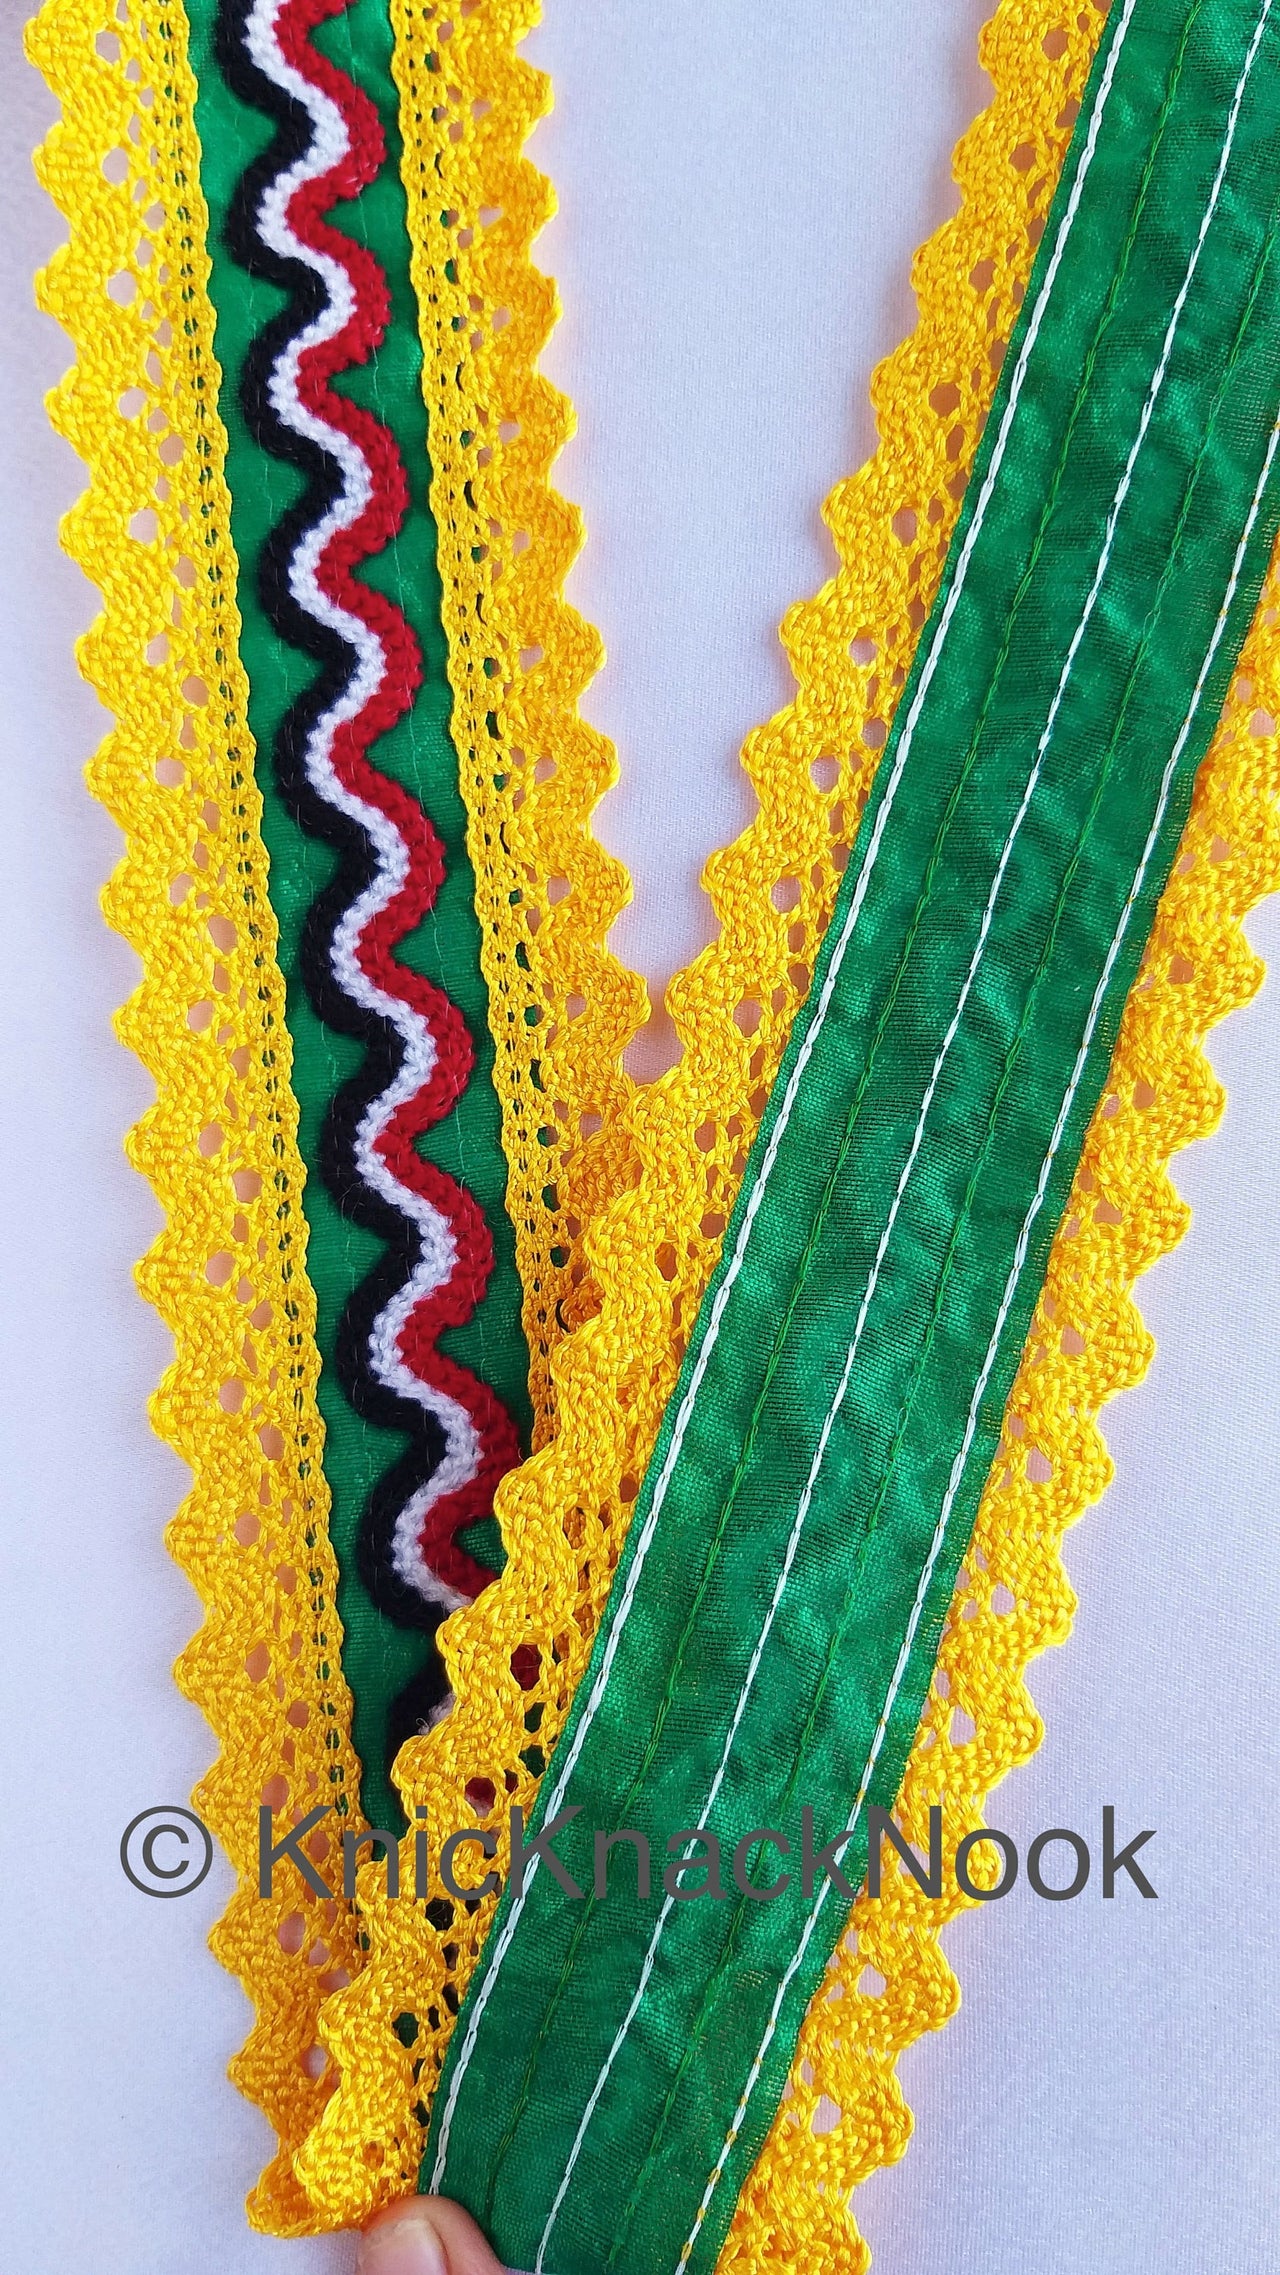 Embroidered Fabric Trim In Crochet Detail, Bohemian Trimming, Lace Trims